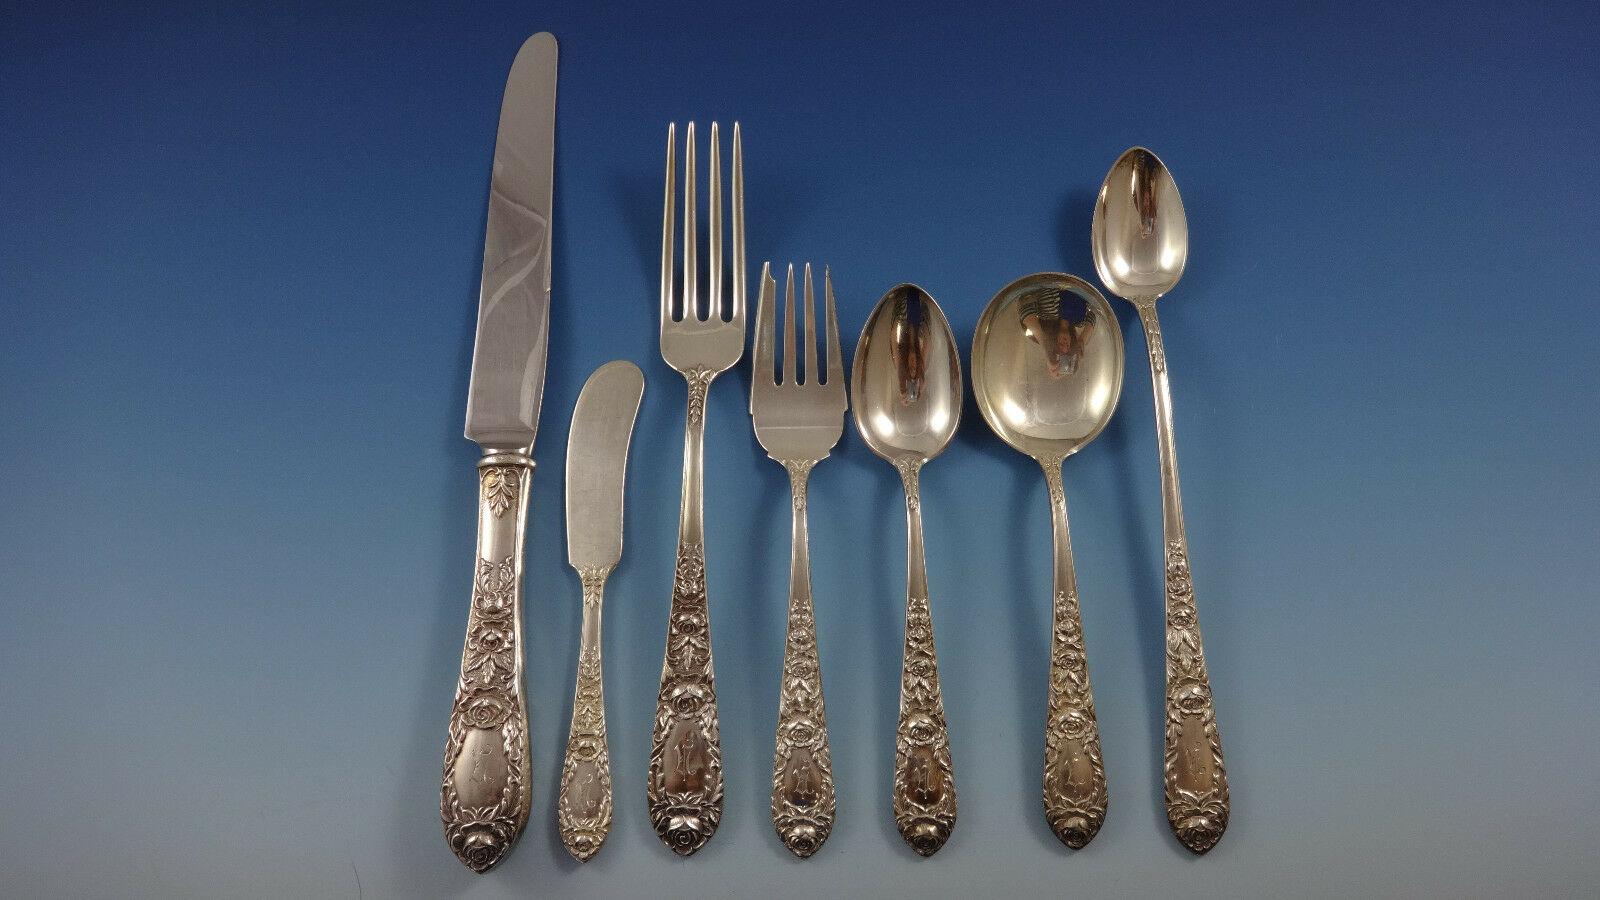 Beautiful Rose by Kirk sterling silver dinner size flatware set of 86 pieces. This set has the large dinner knives and forks and is wonderfully heavy. This set includes:

12 dinner size knives, 9 3/4